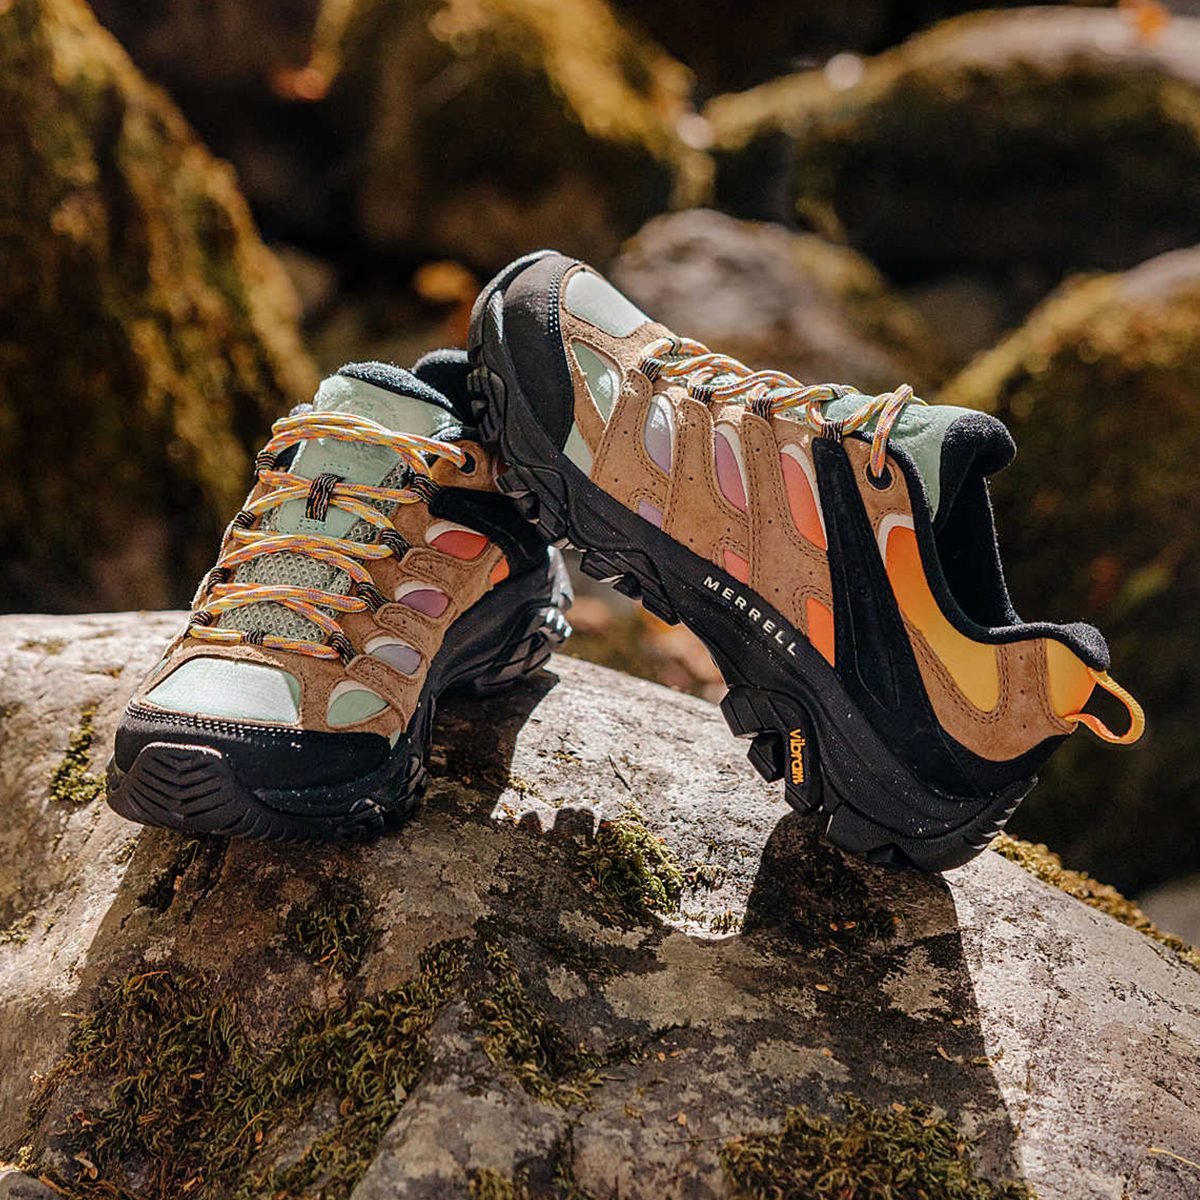 Our Favorite Editor-Tested Merrell Hiking Shoes for Every Type of Terrain